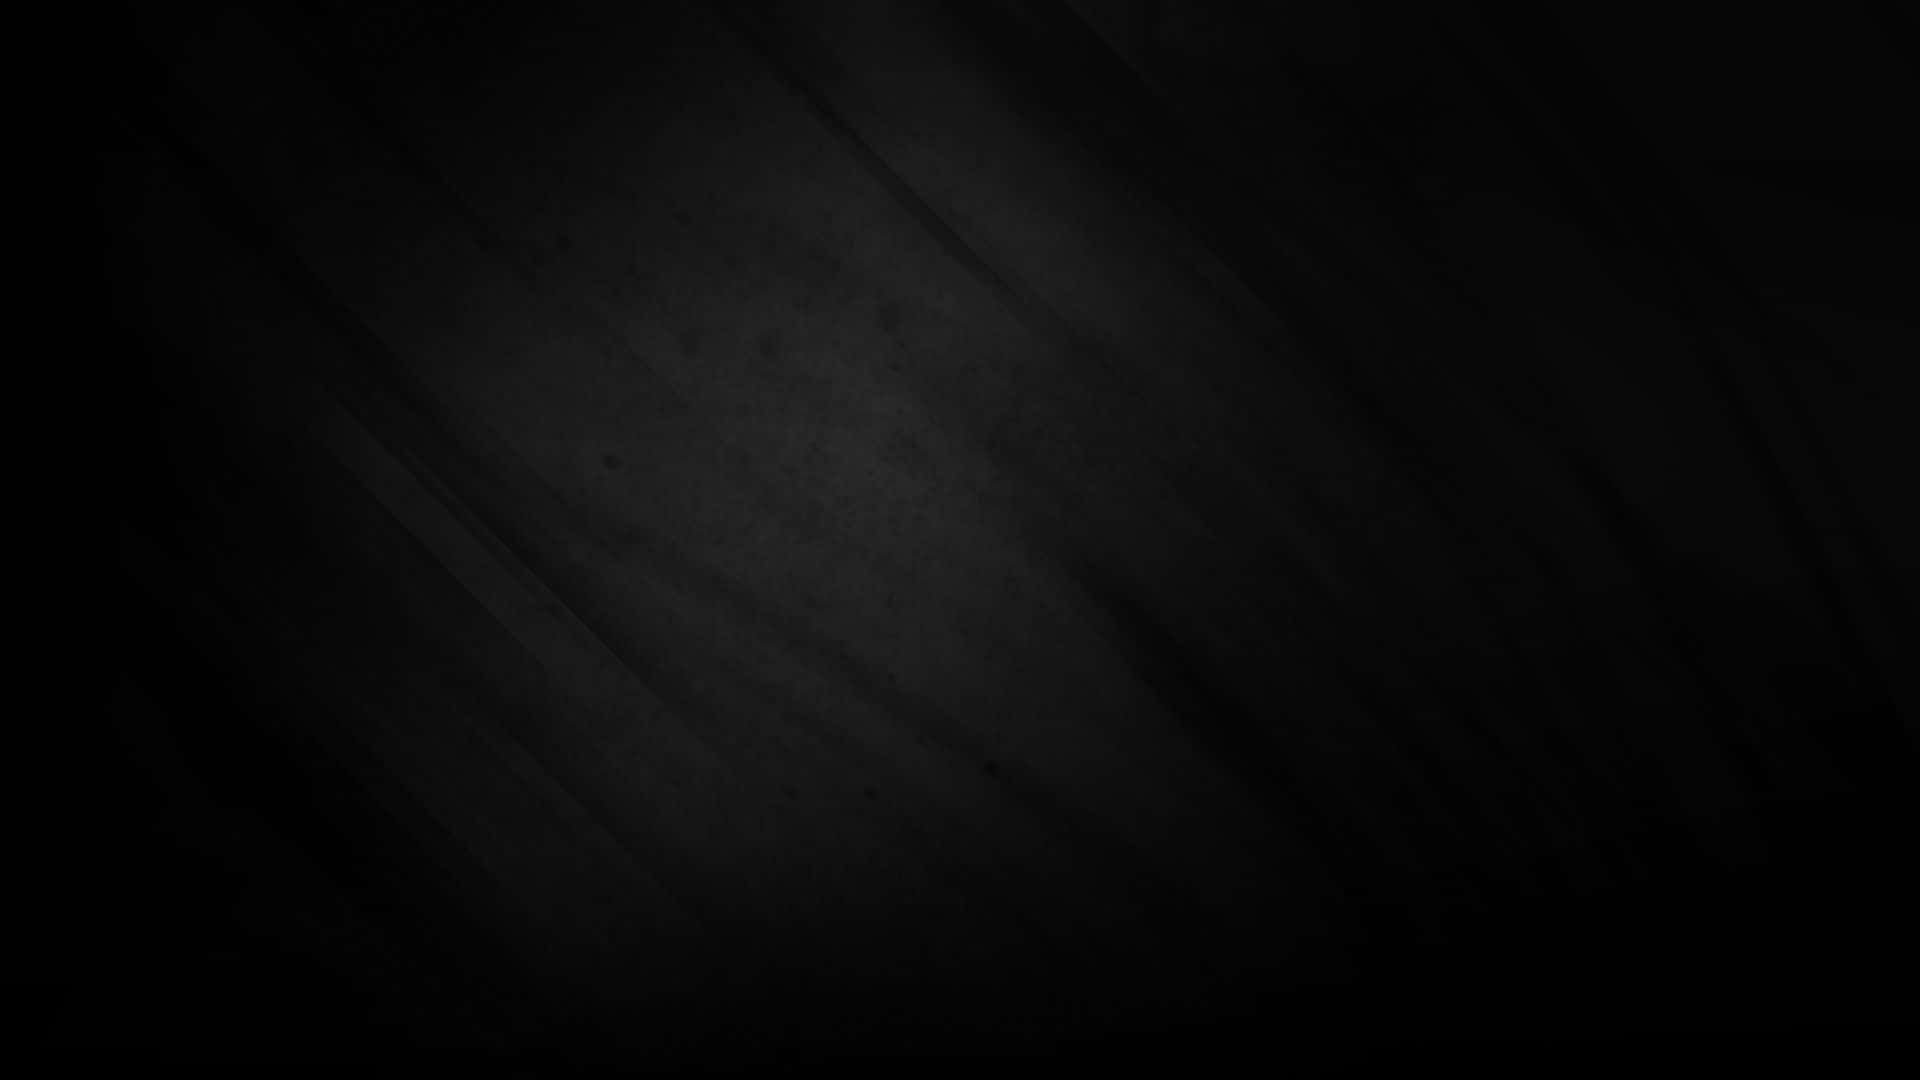 Special Black Grunge Style Background